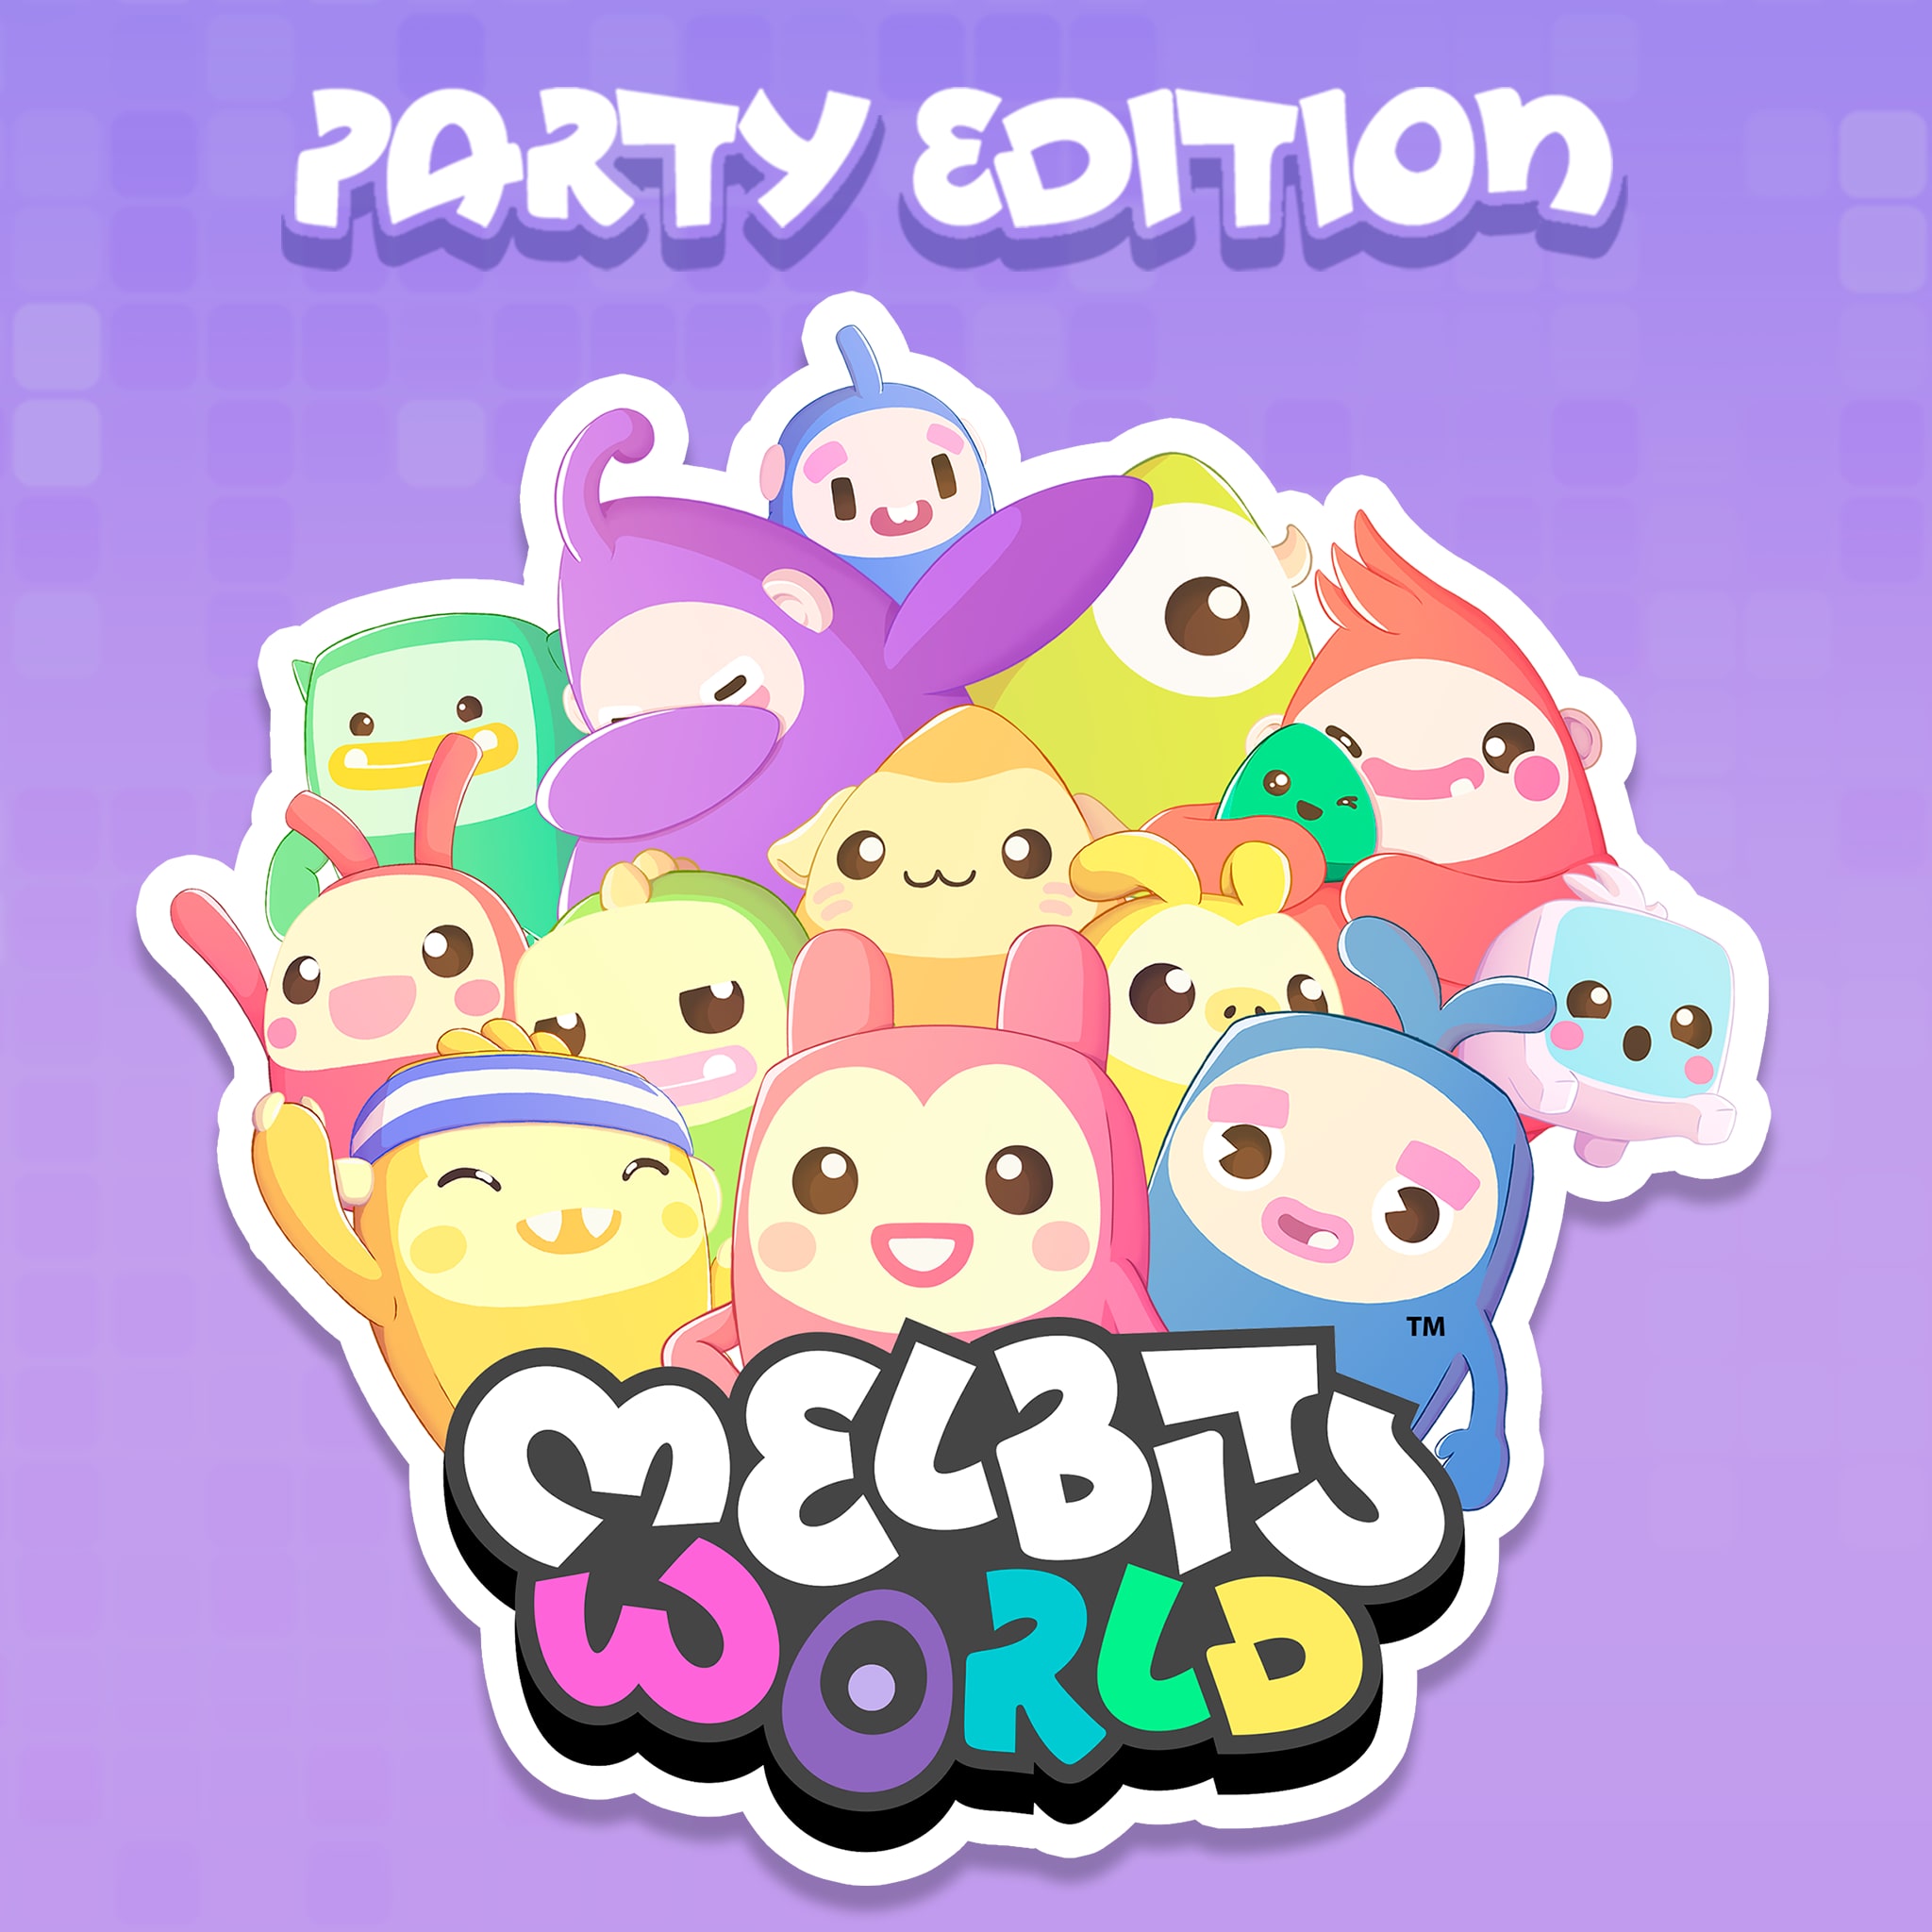 Melbits™ World Party Edition